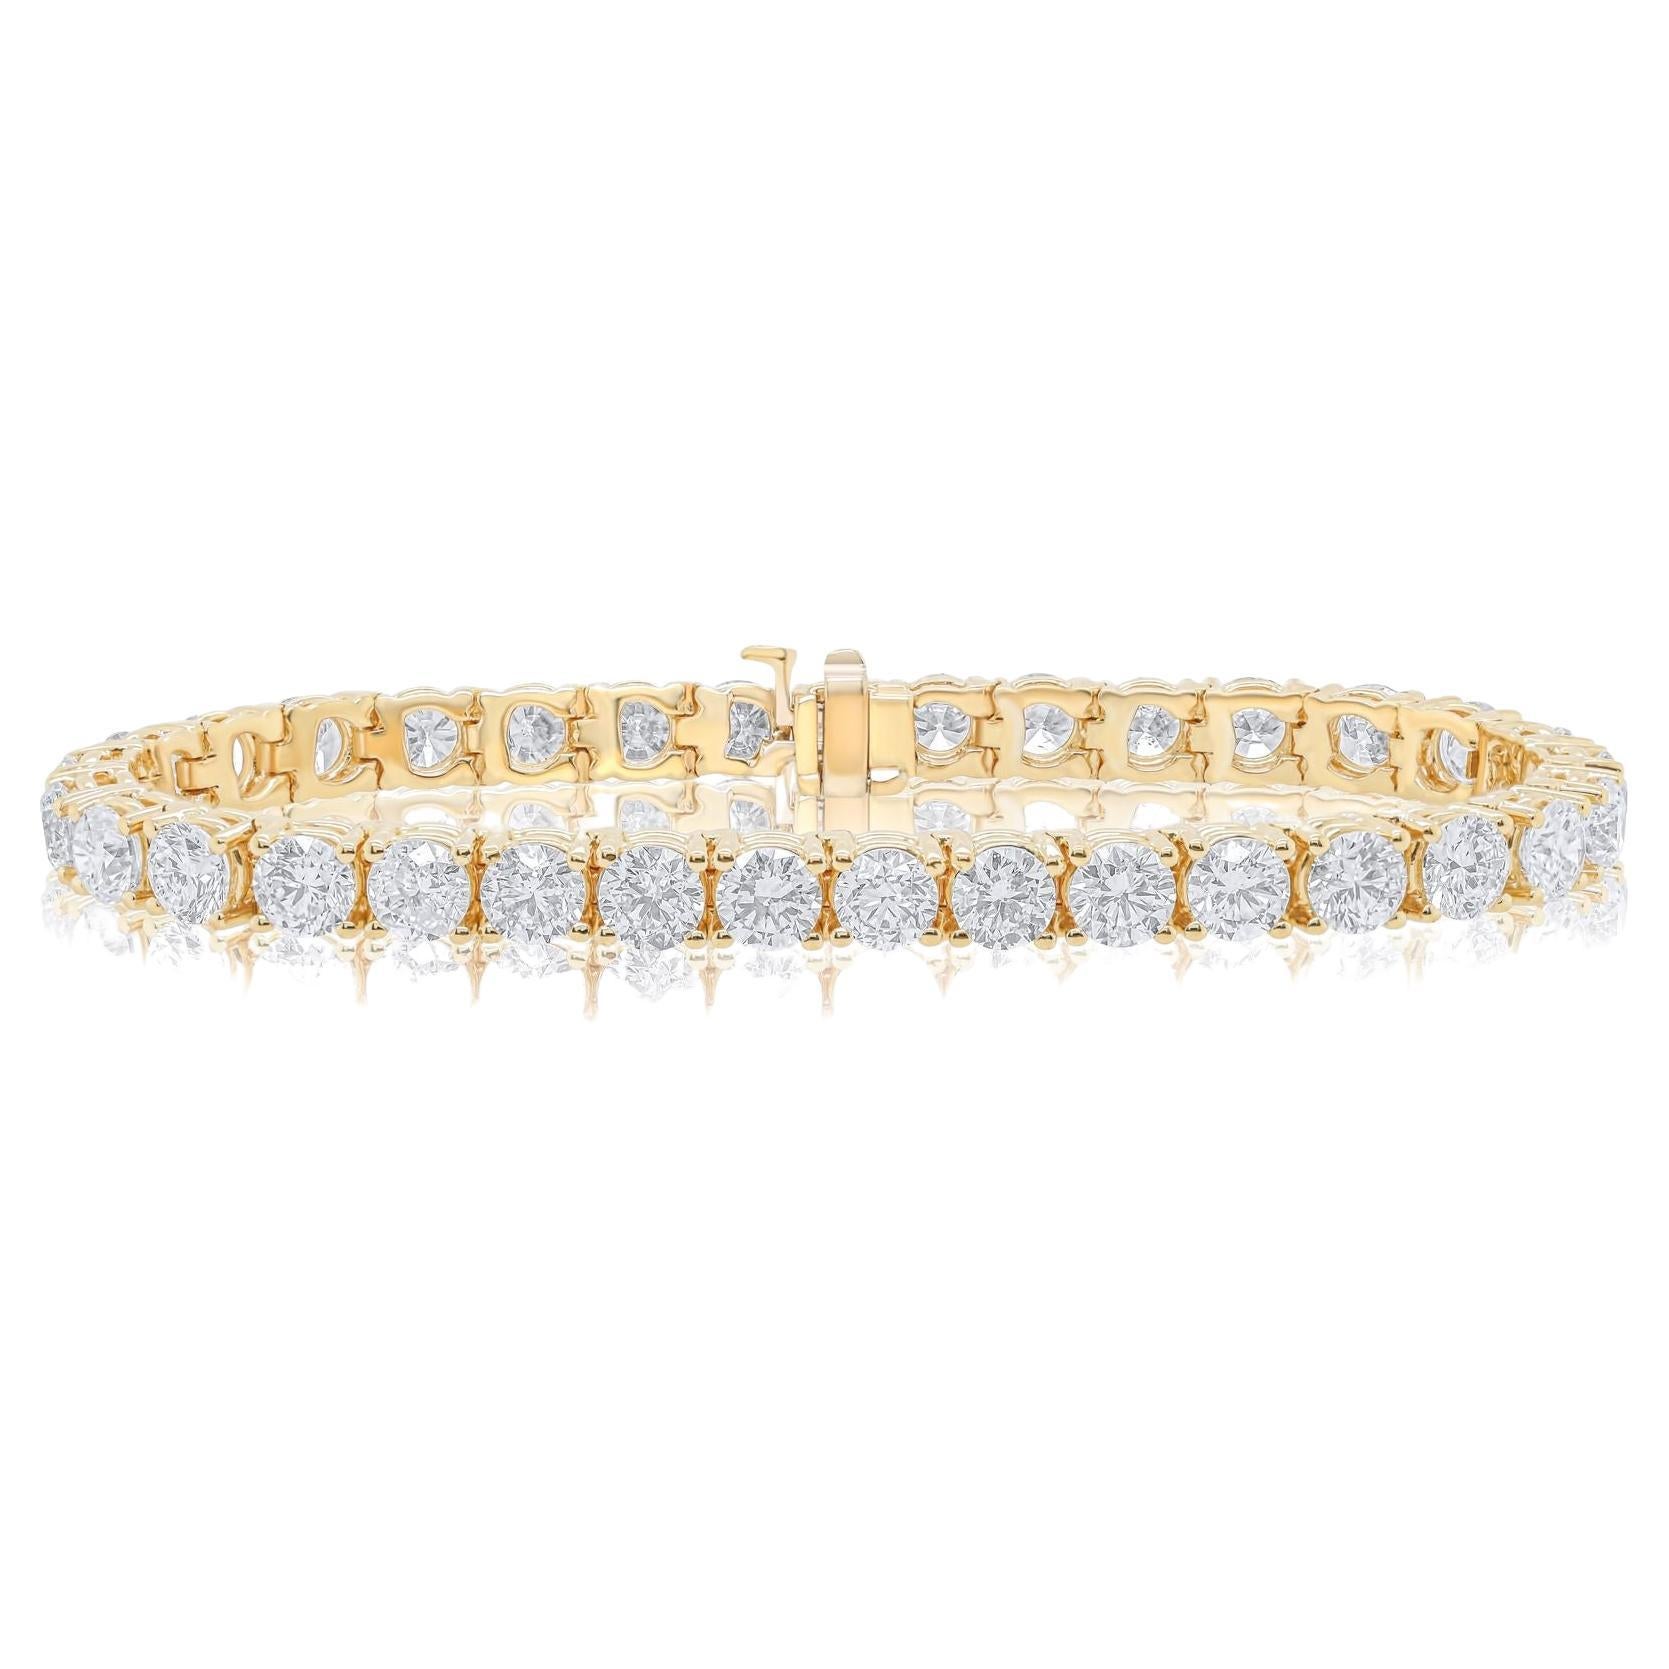 Diana M. 18 kt yellow gold 4 prong diamond tennis bracelet adorned with 16.30ct